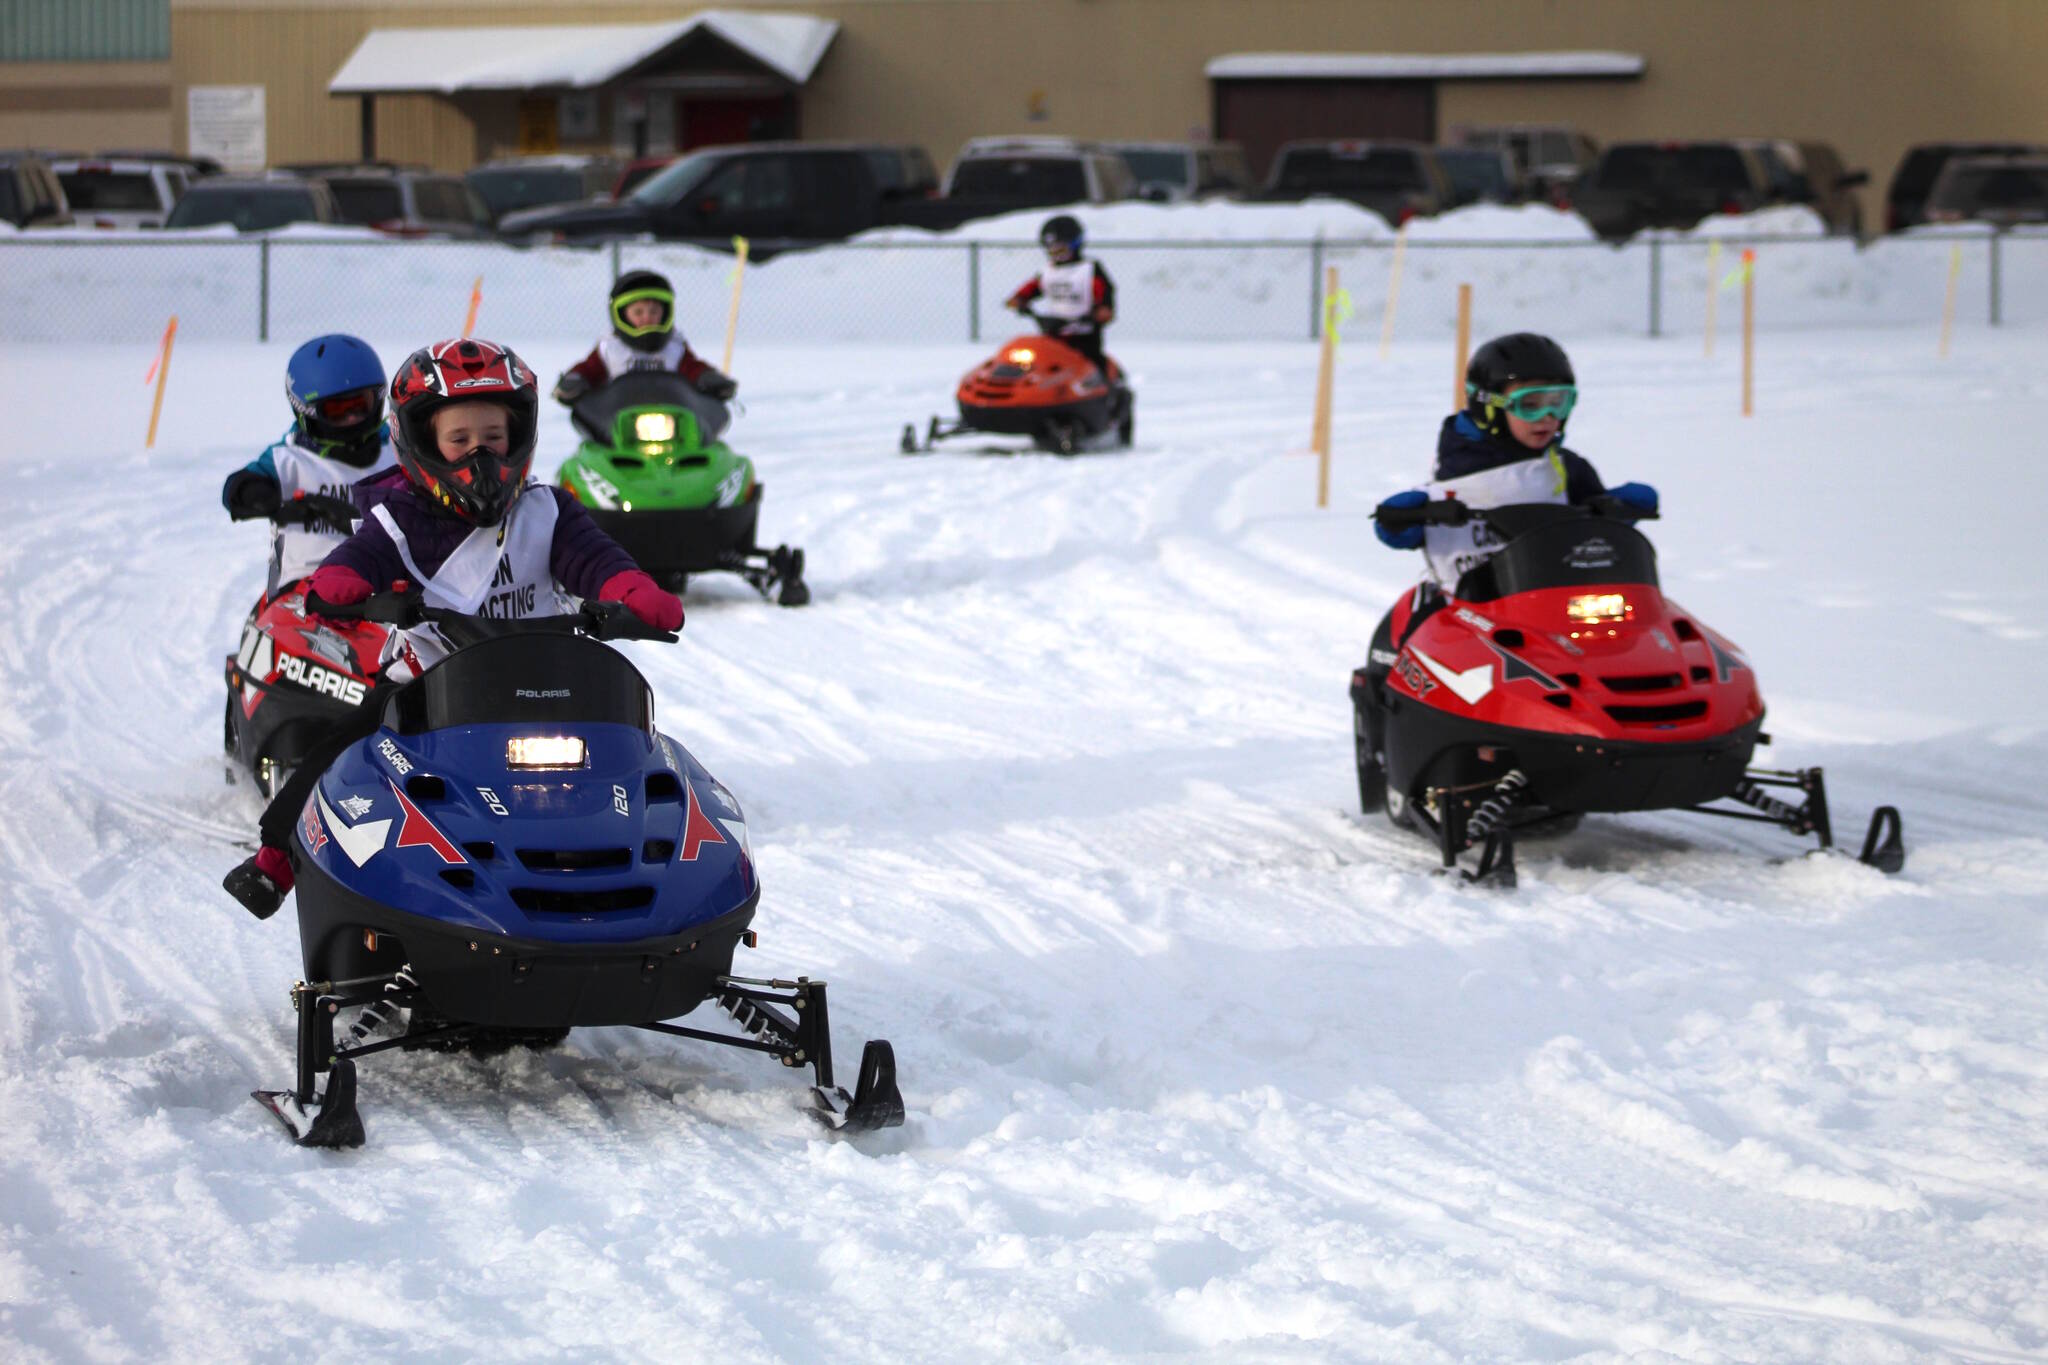 Snowmobile races and other cold weather activities are popular during the winter months. (Marisca Bakker photo)